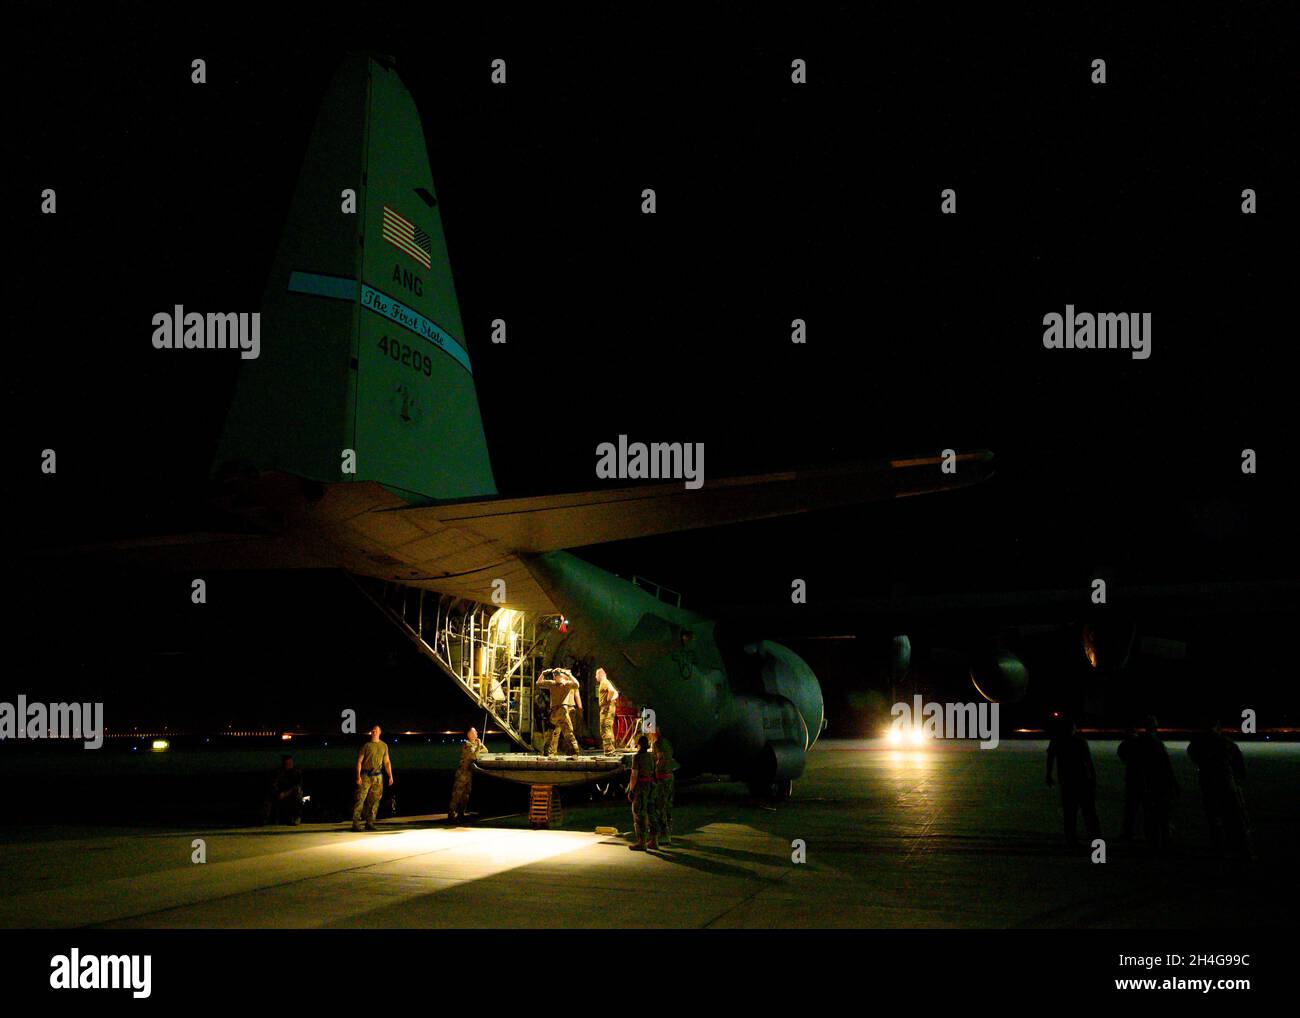 U.S. Air Force personnel load cargo onto a C-130 Hercules on the flightline at Prince Sultan Air Base, Kingdom of Saudi Arabia, prior to takeoff for Al Udeid Air Base, Qatar, Aug. 21, 2021. The 378th Air Expeditionary Wing provided air support, logistics, manpower and resources to U.S. Air Forces Central command in support of the evacuation of American citizens, special immigrant visa applicants and other at-risk individuals from Afghanistan. (U.S. Air Force photo by Senior Airman Samuel Earick) Stock Photo